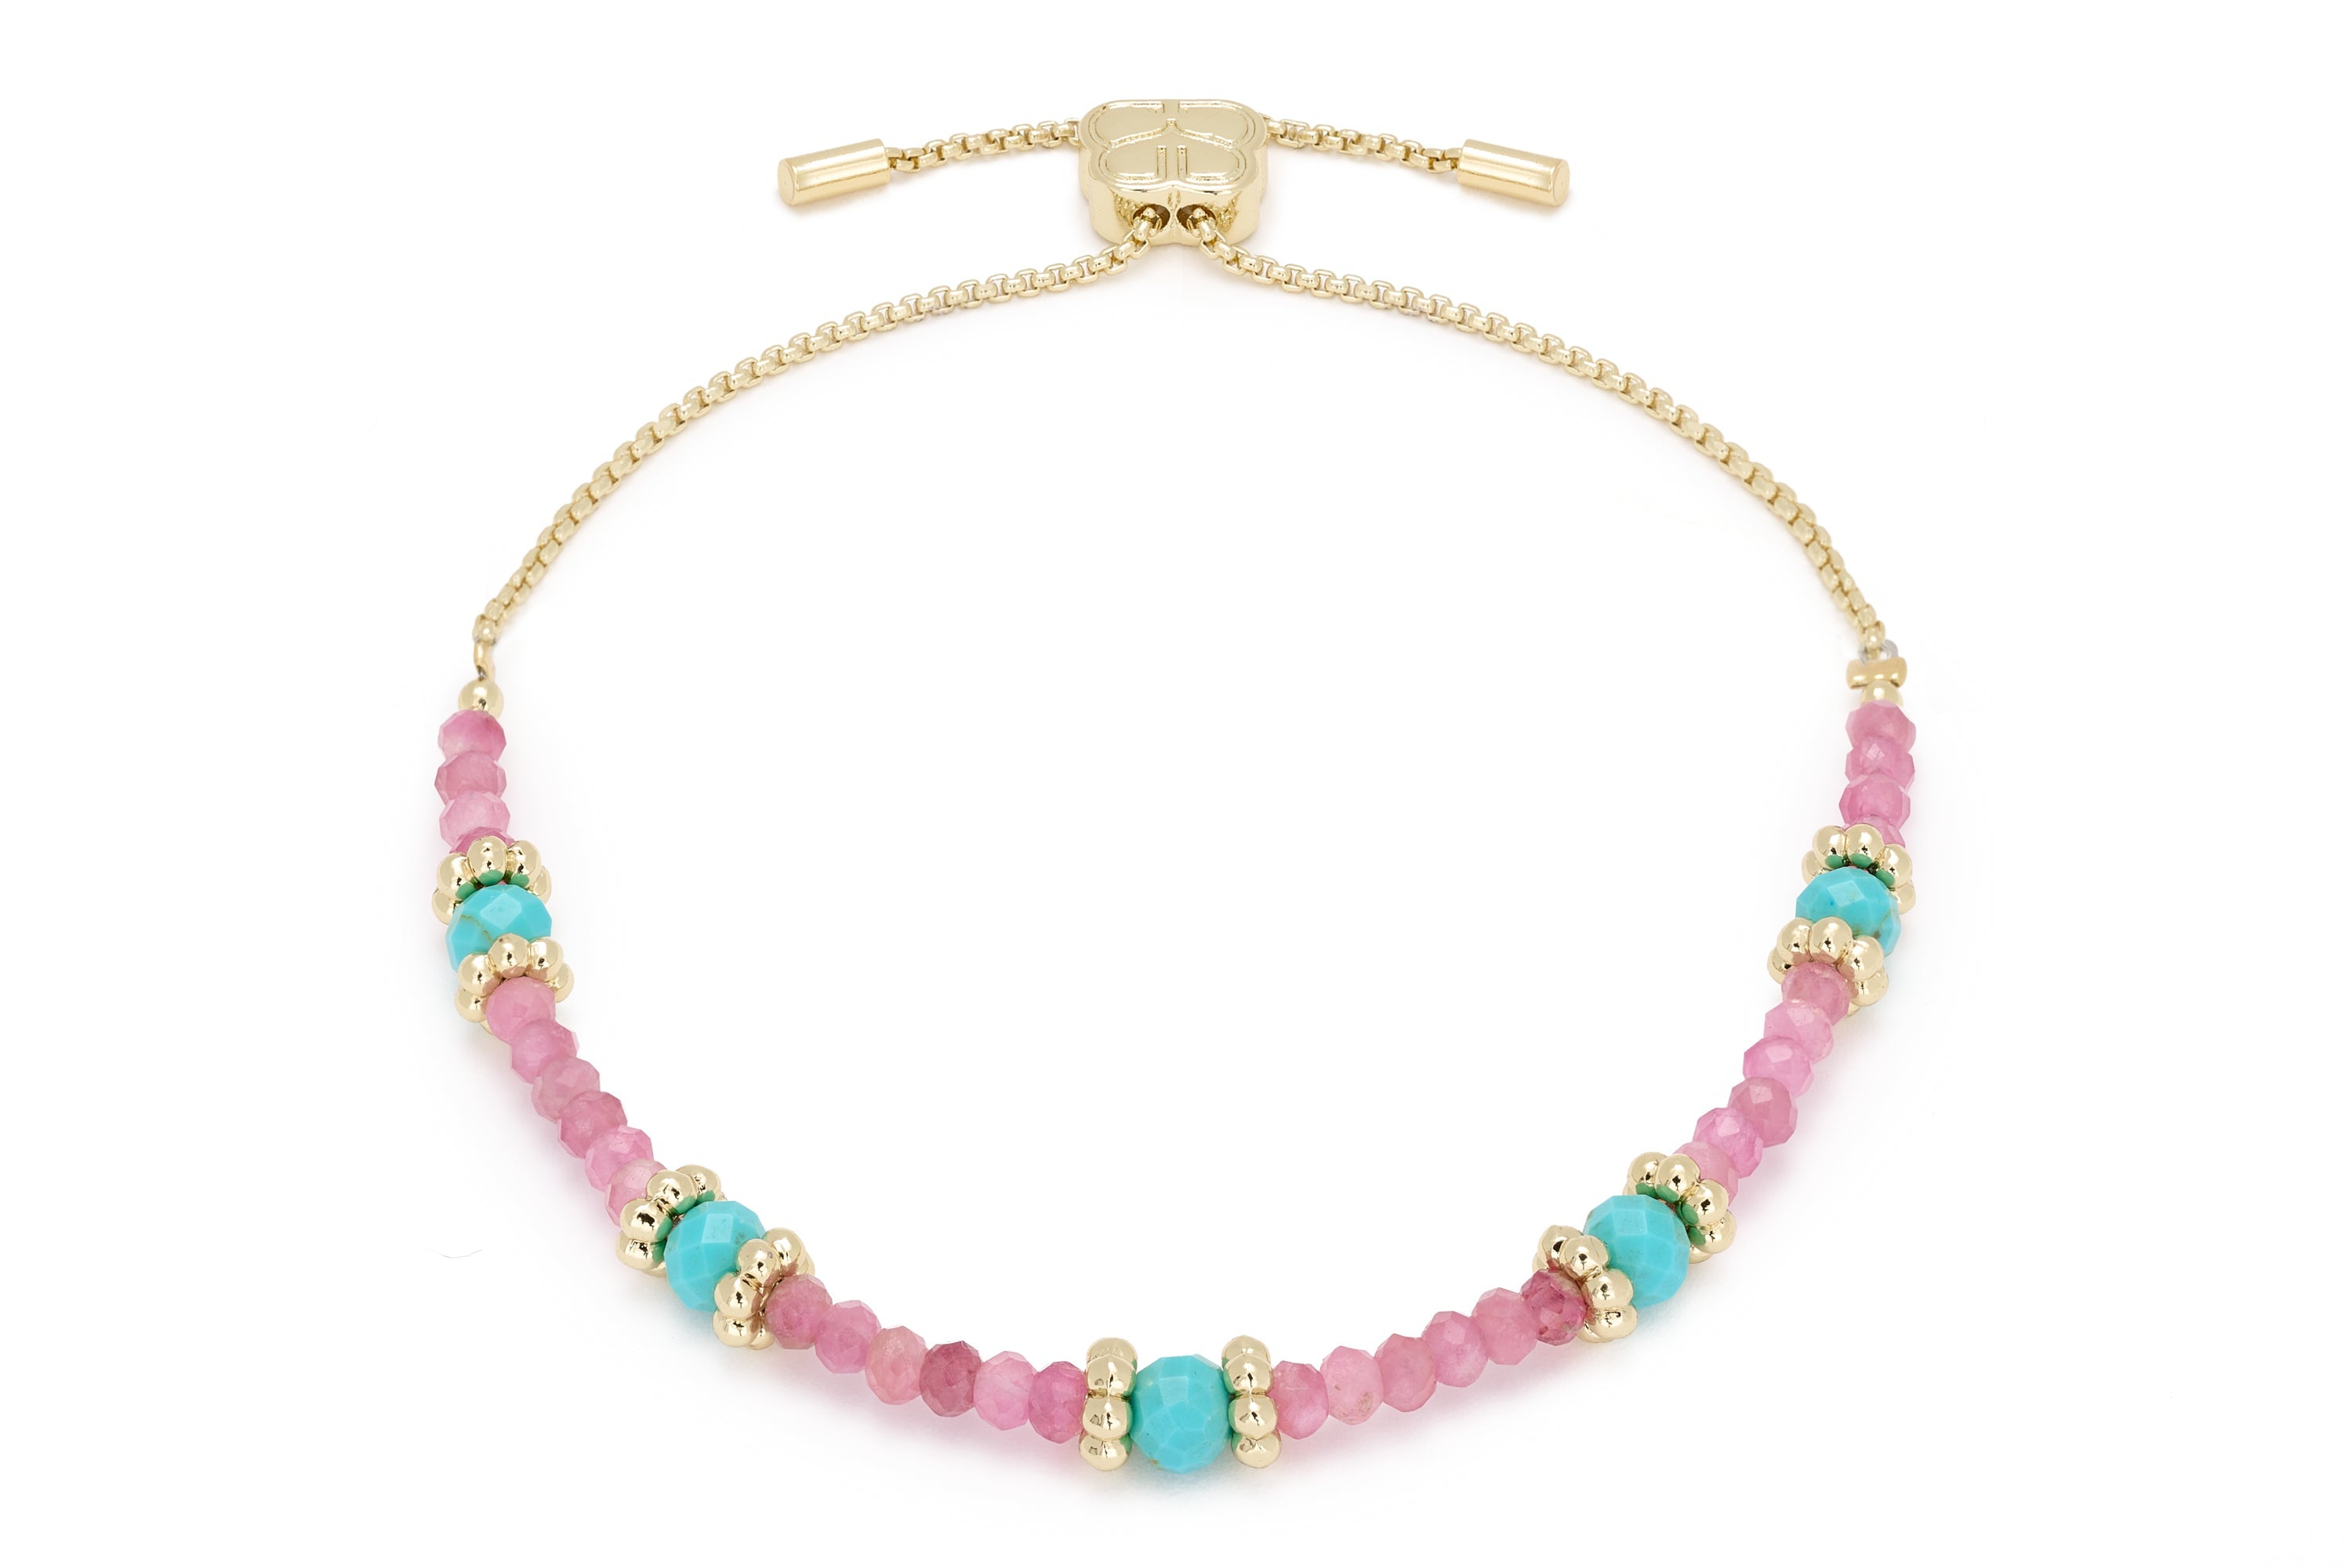 Delight Pink and Turquoise Gemstone Bracelet